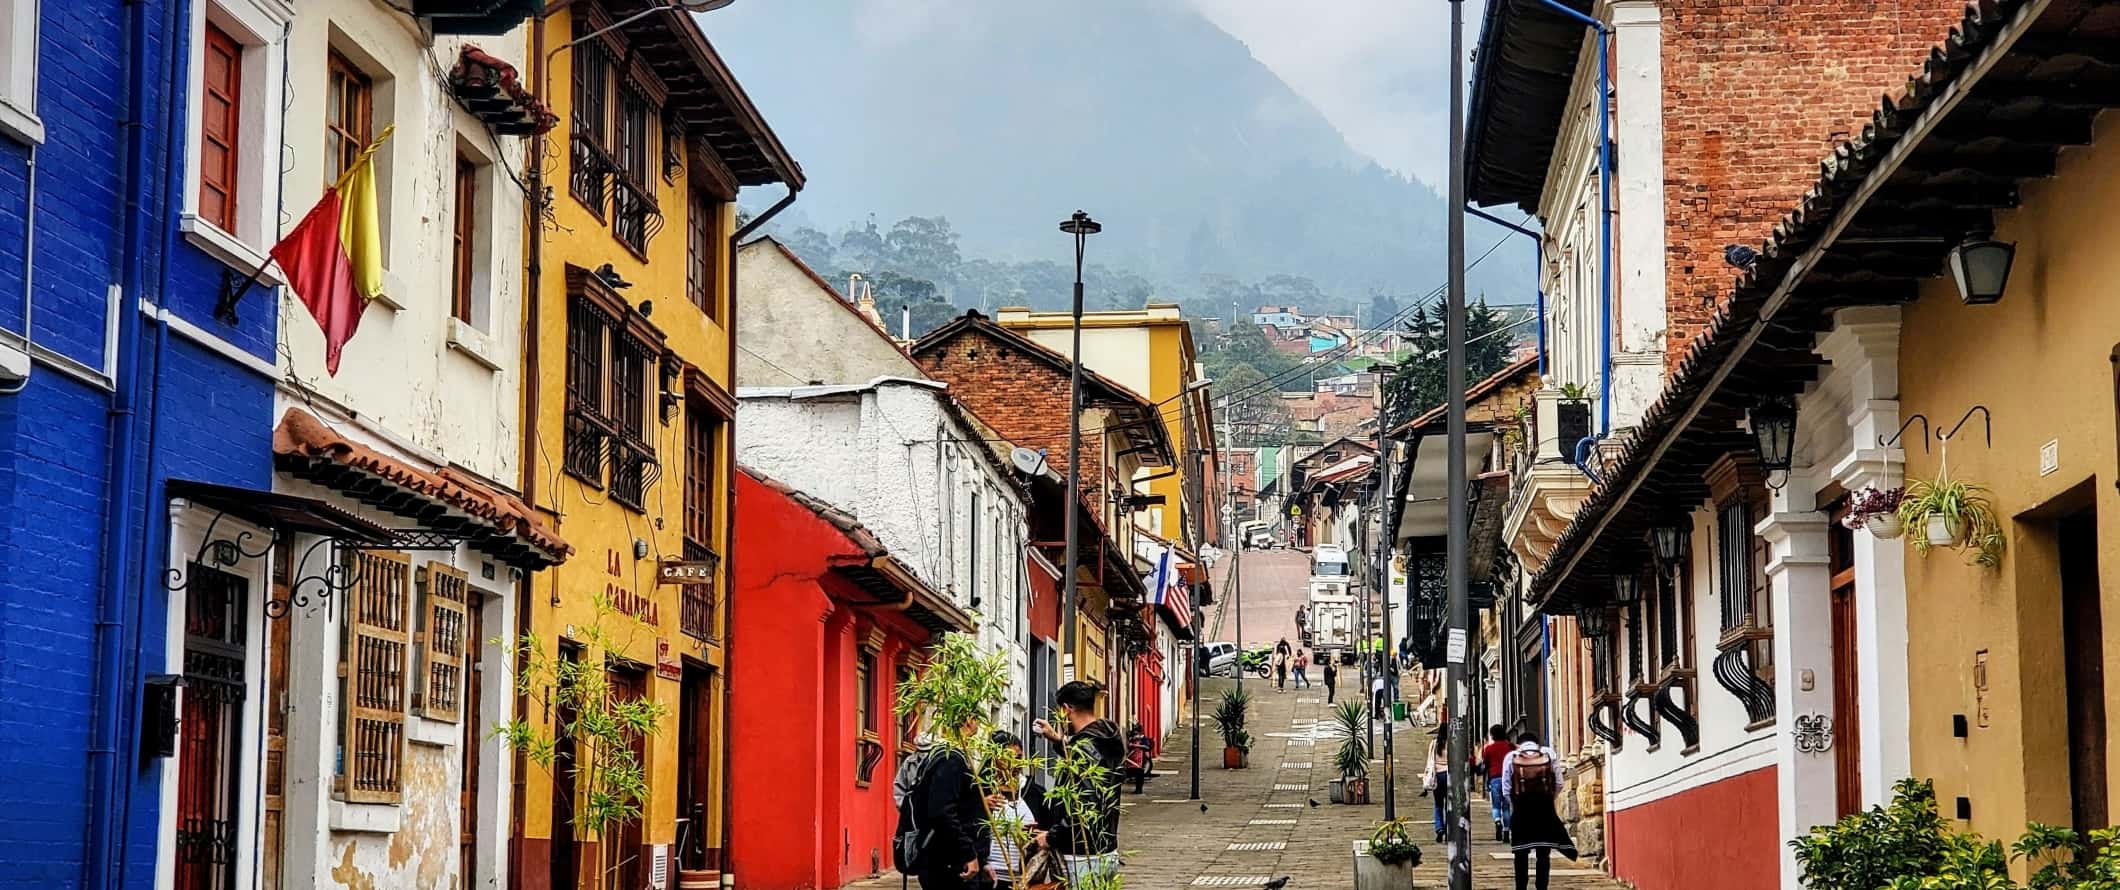 Street lined with colorful houses in the historic neighborhood of La Candelaria in Bogota, Colombia 